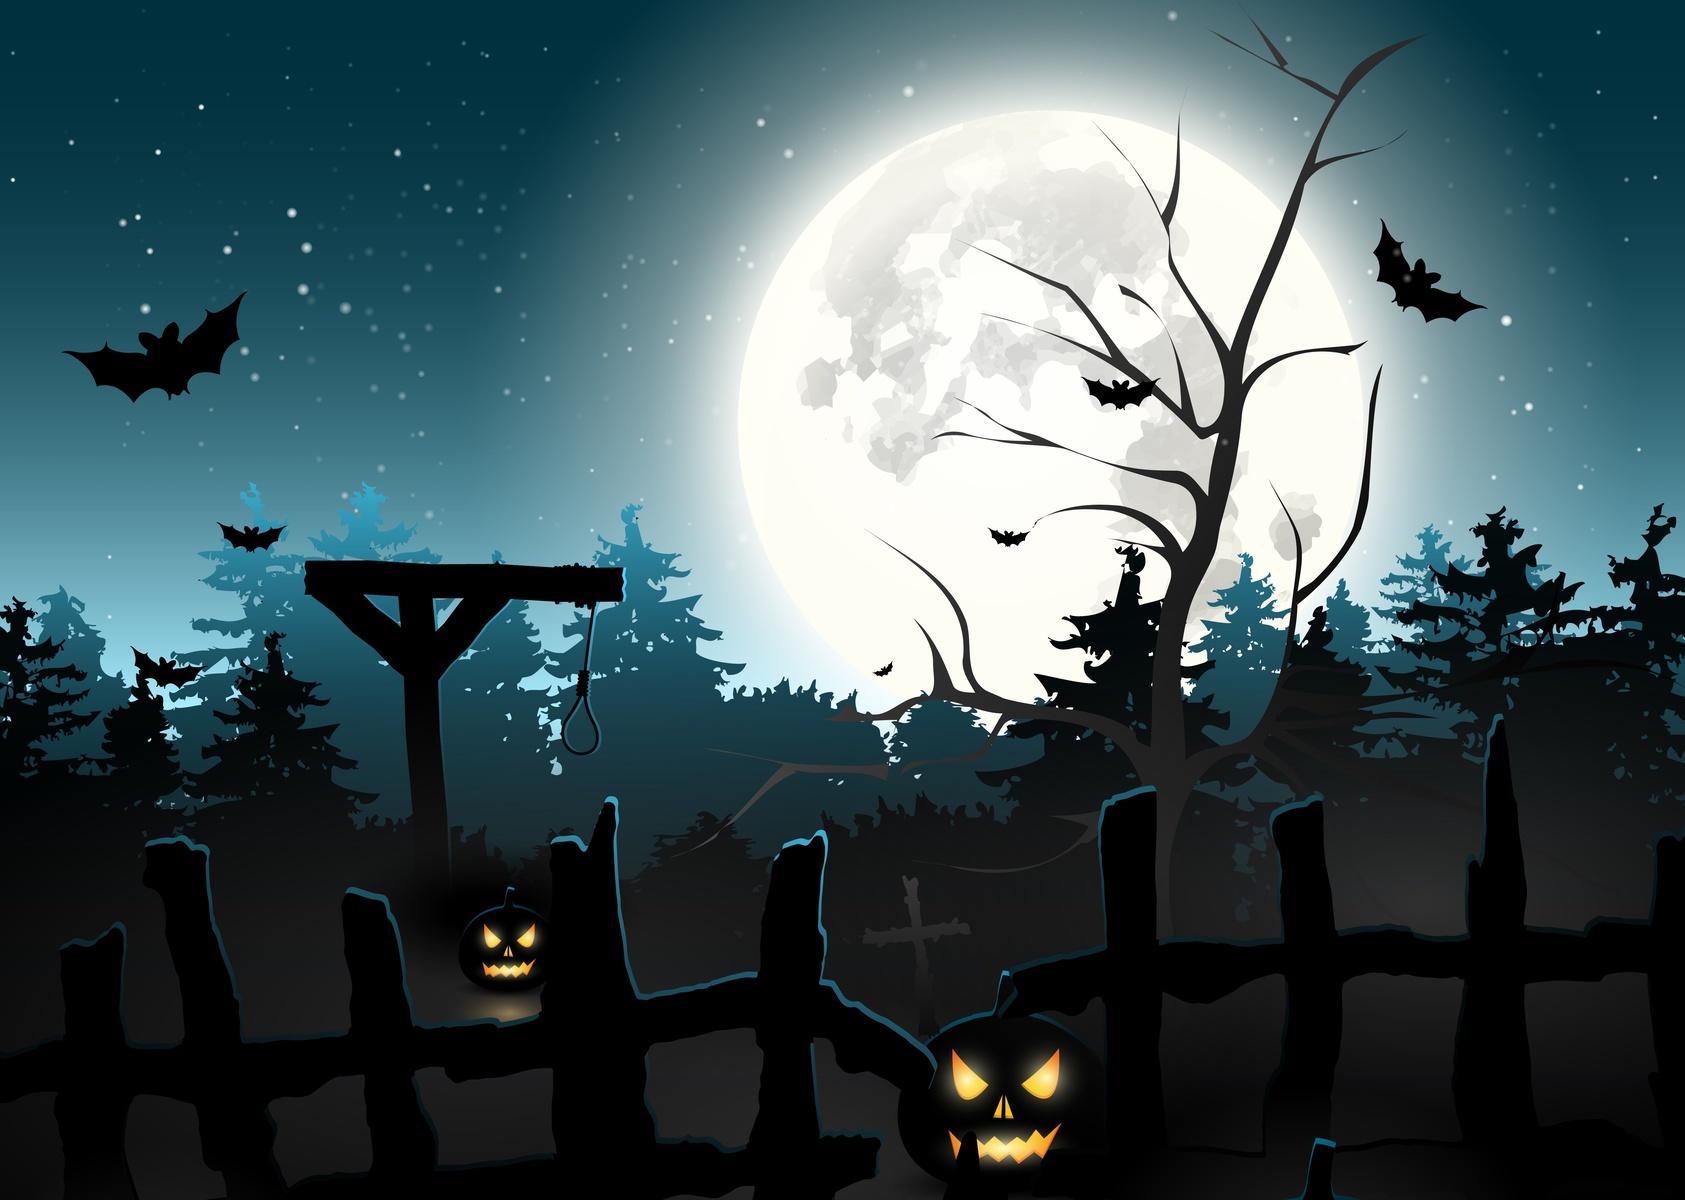 Halloween Live Wallpaper Backgrounds Themes For Android Apk Download - wallpaper roblox halloween background